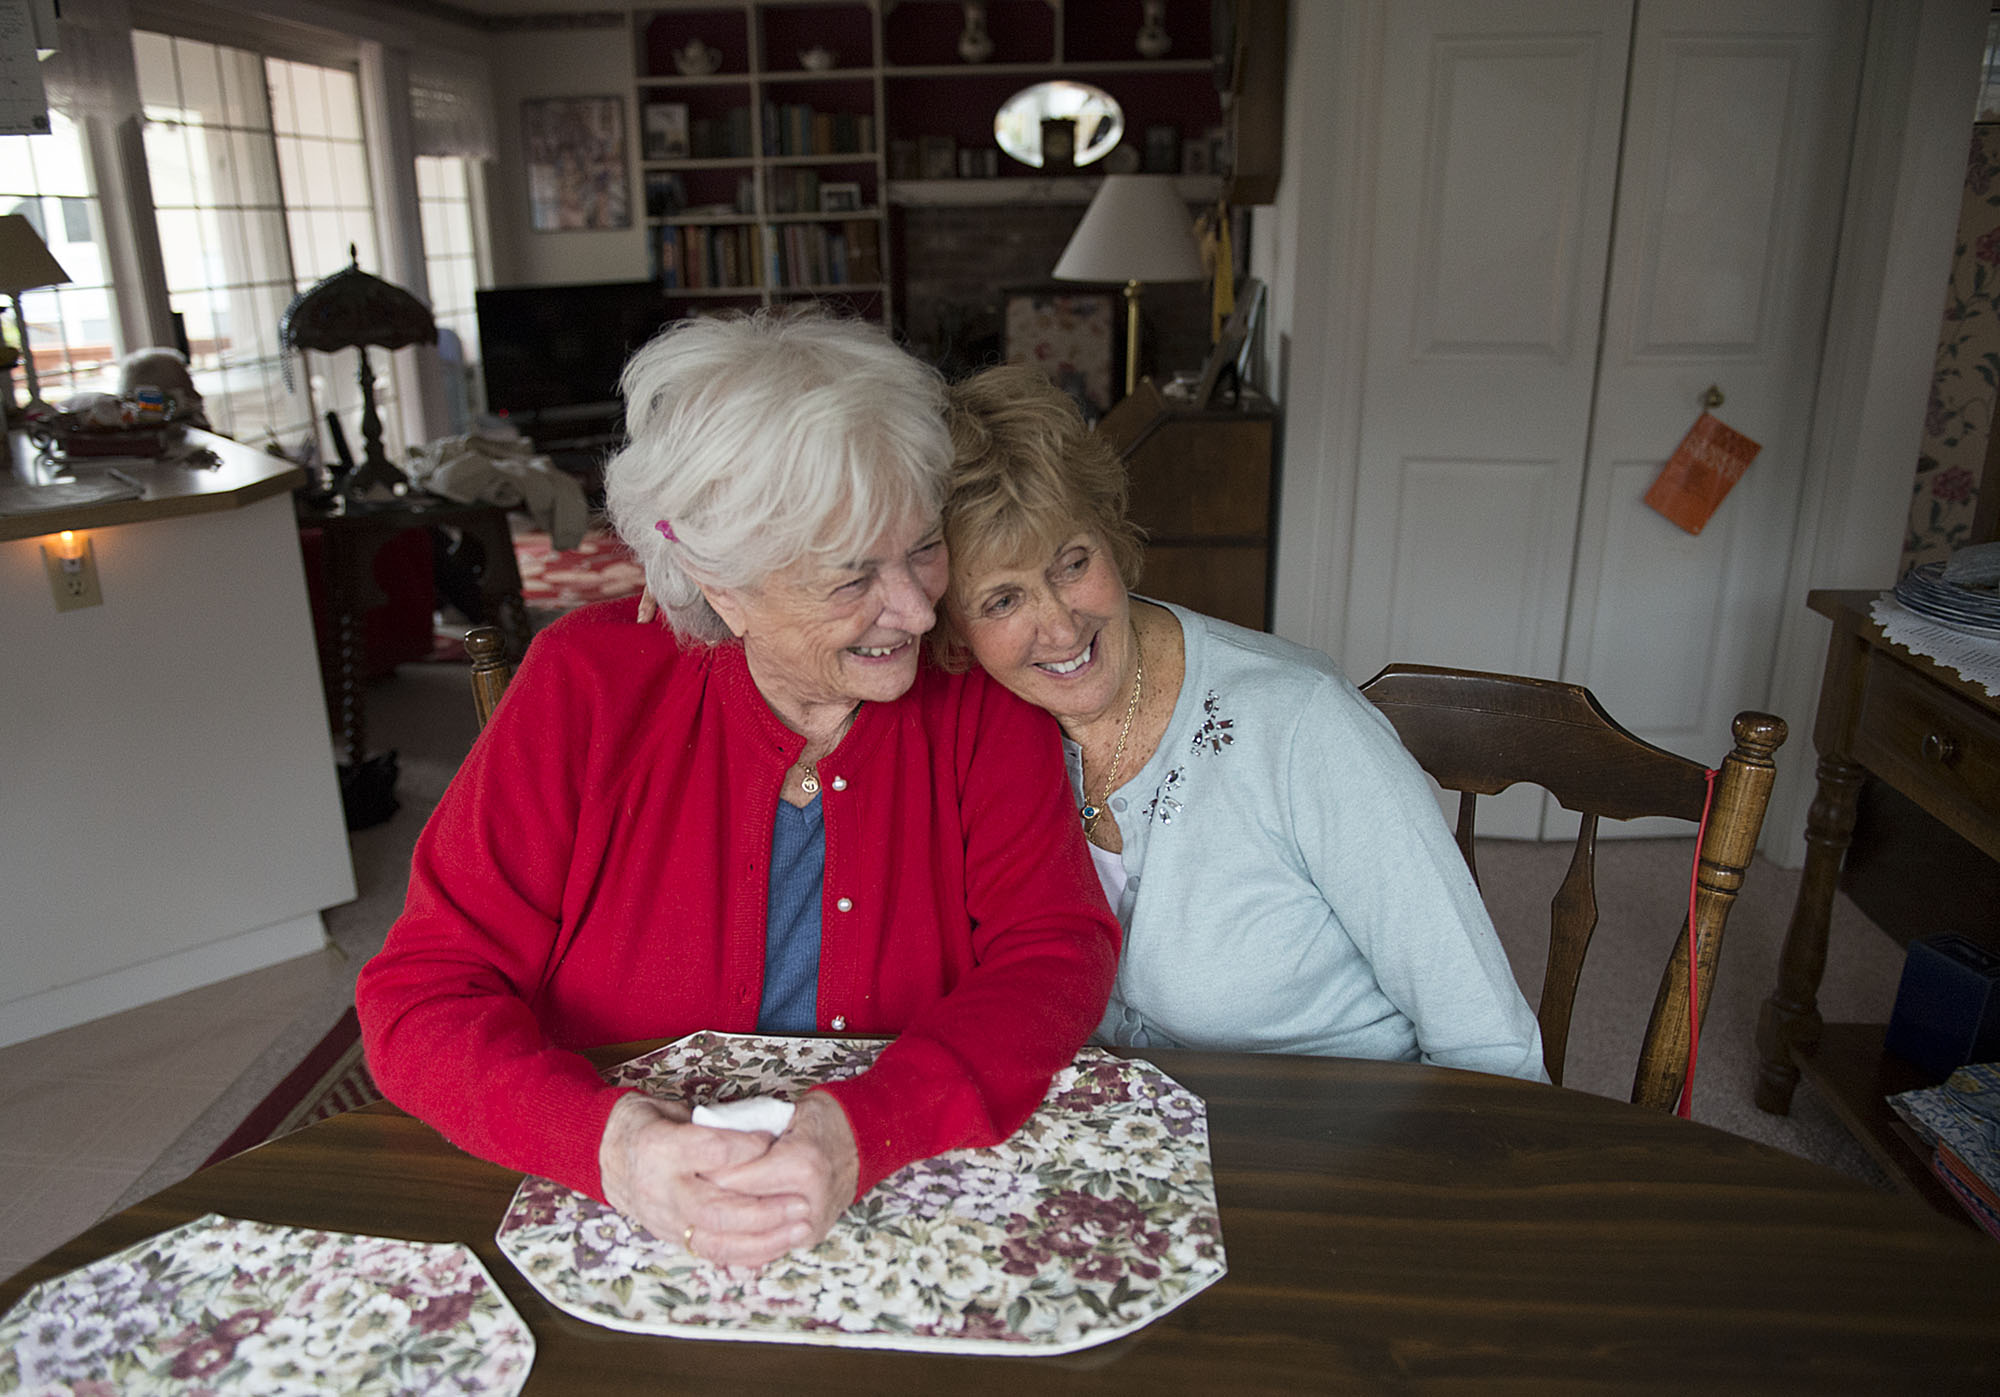 Rita Stewart, left, and her sister, Roma Ekstrom, remember life in England during World War II on Tuesday afternoon, Dec. 15, 2015 at Stewart's Vancouver home. (Amanda Cowan/The Columbian)